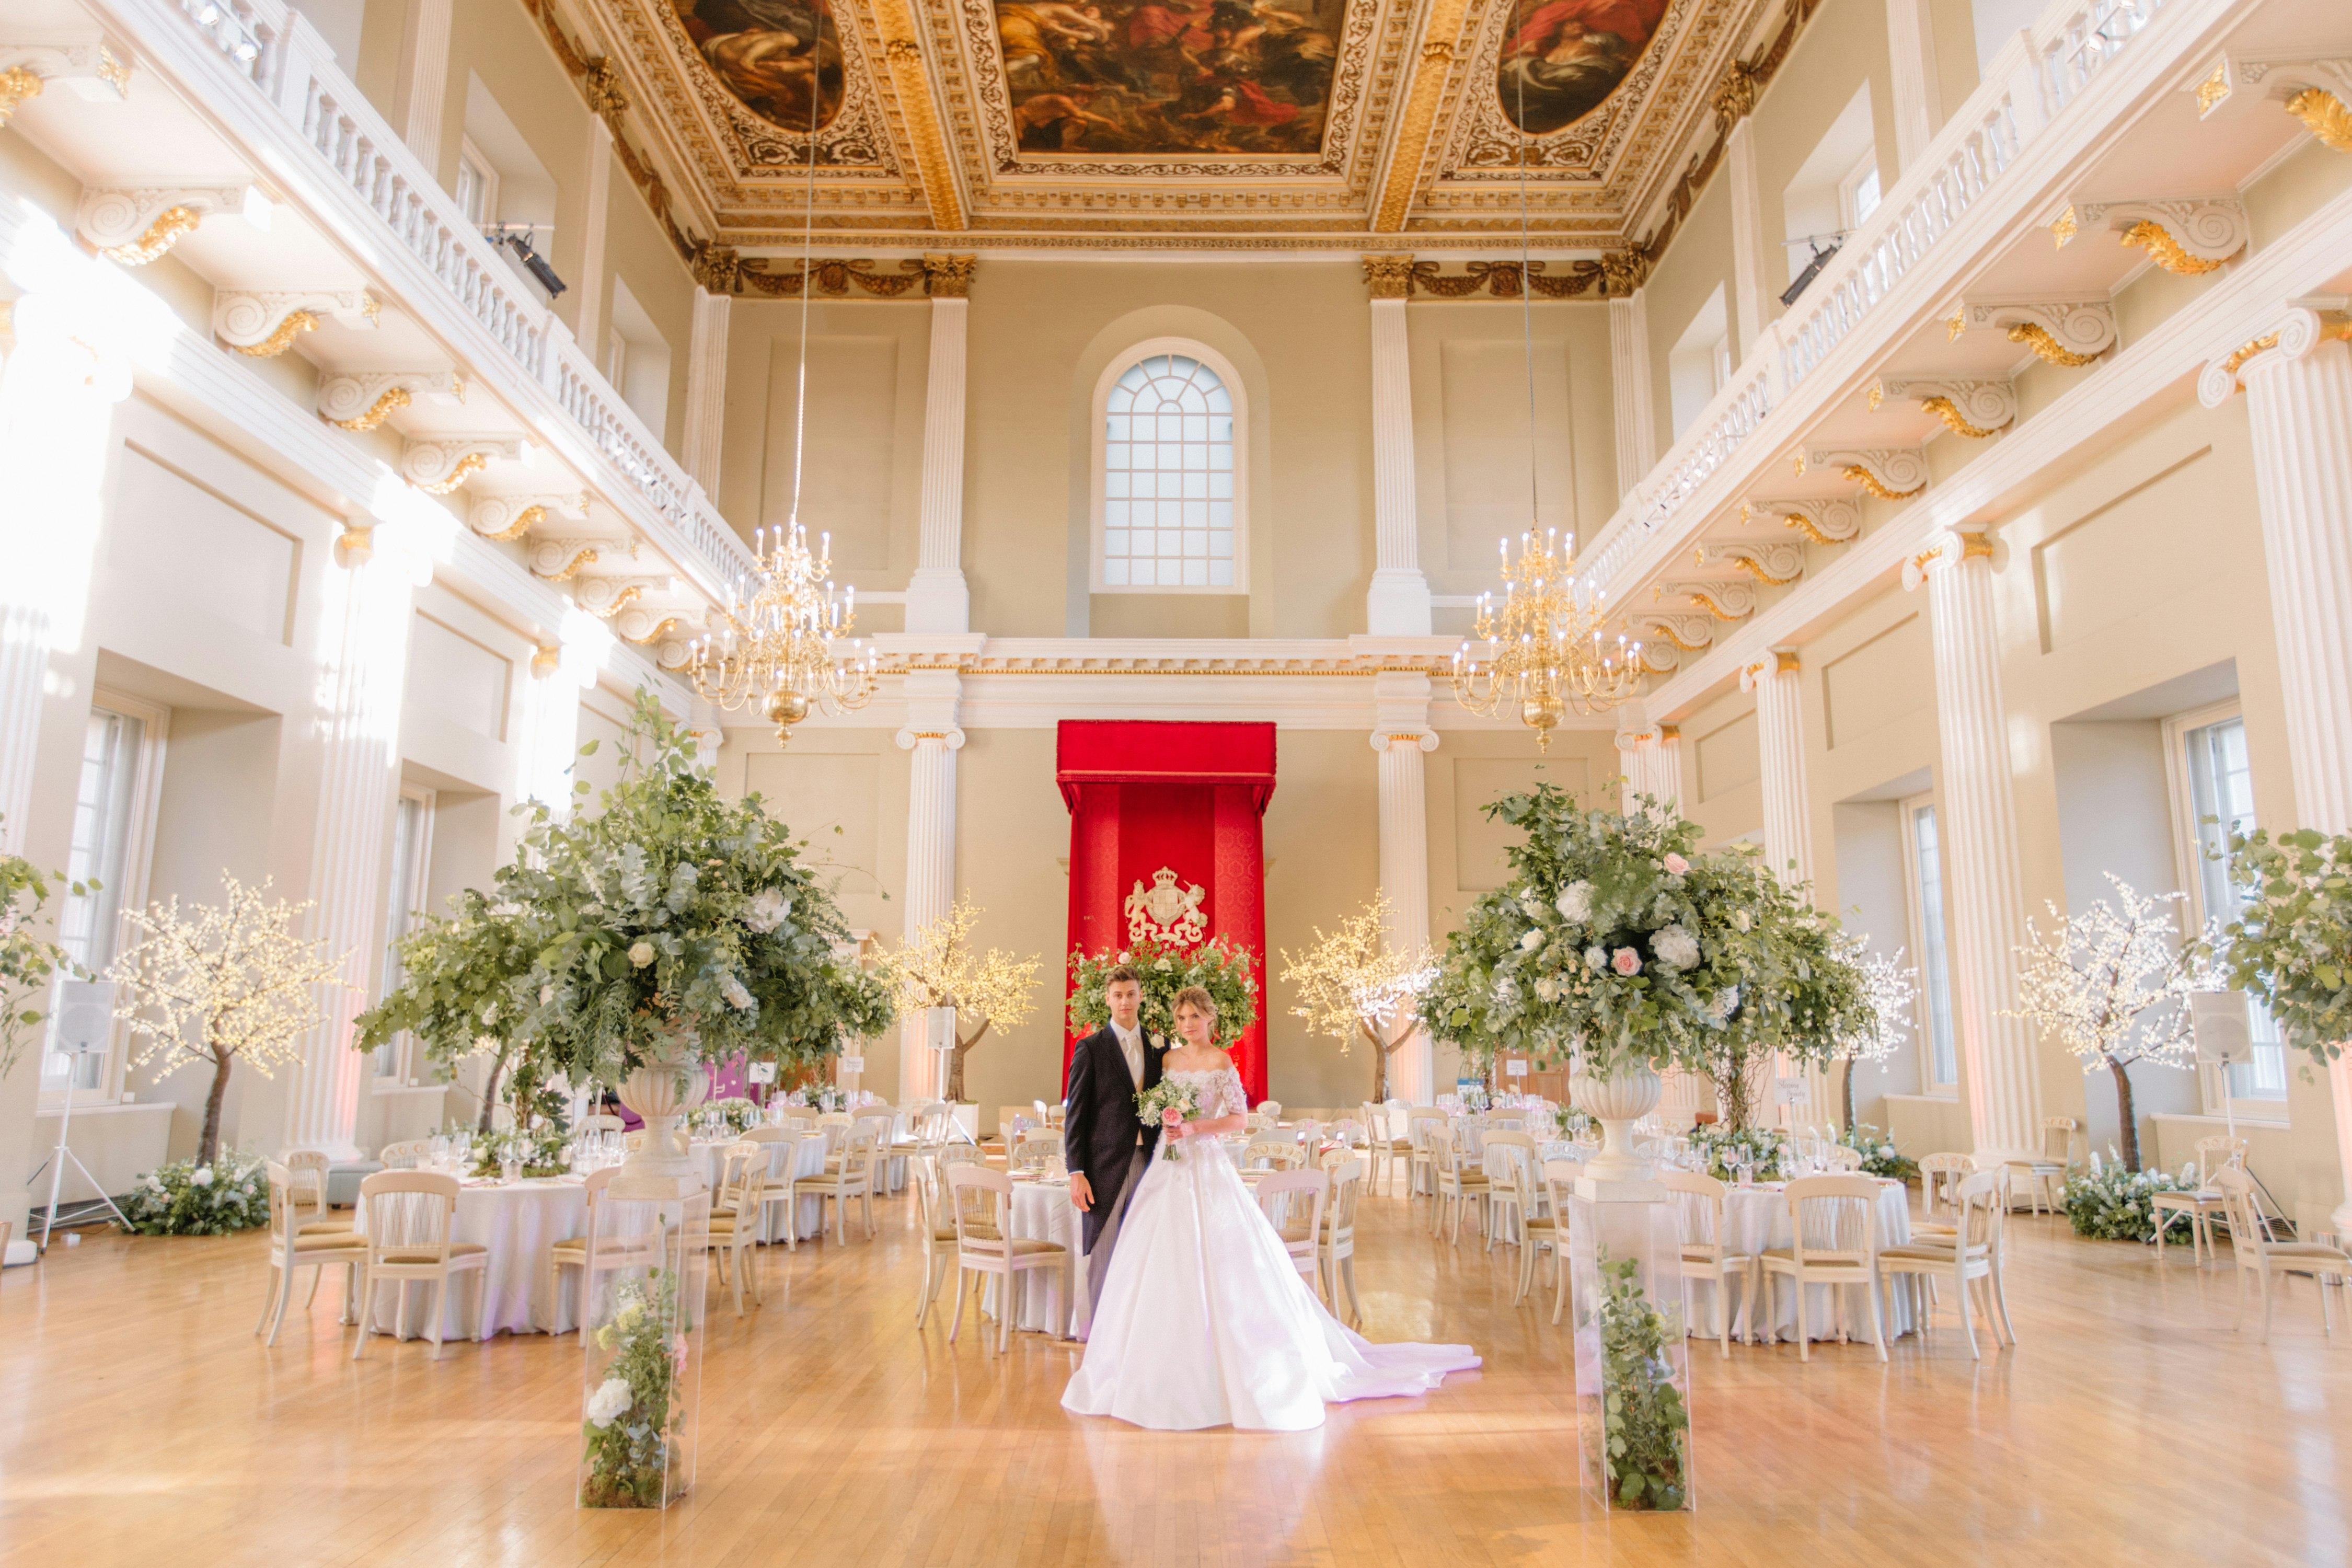 Palaces Venues in London - Banqueting House